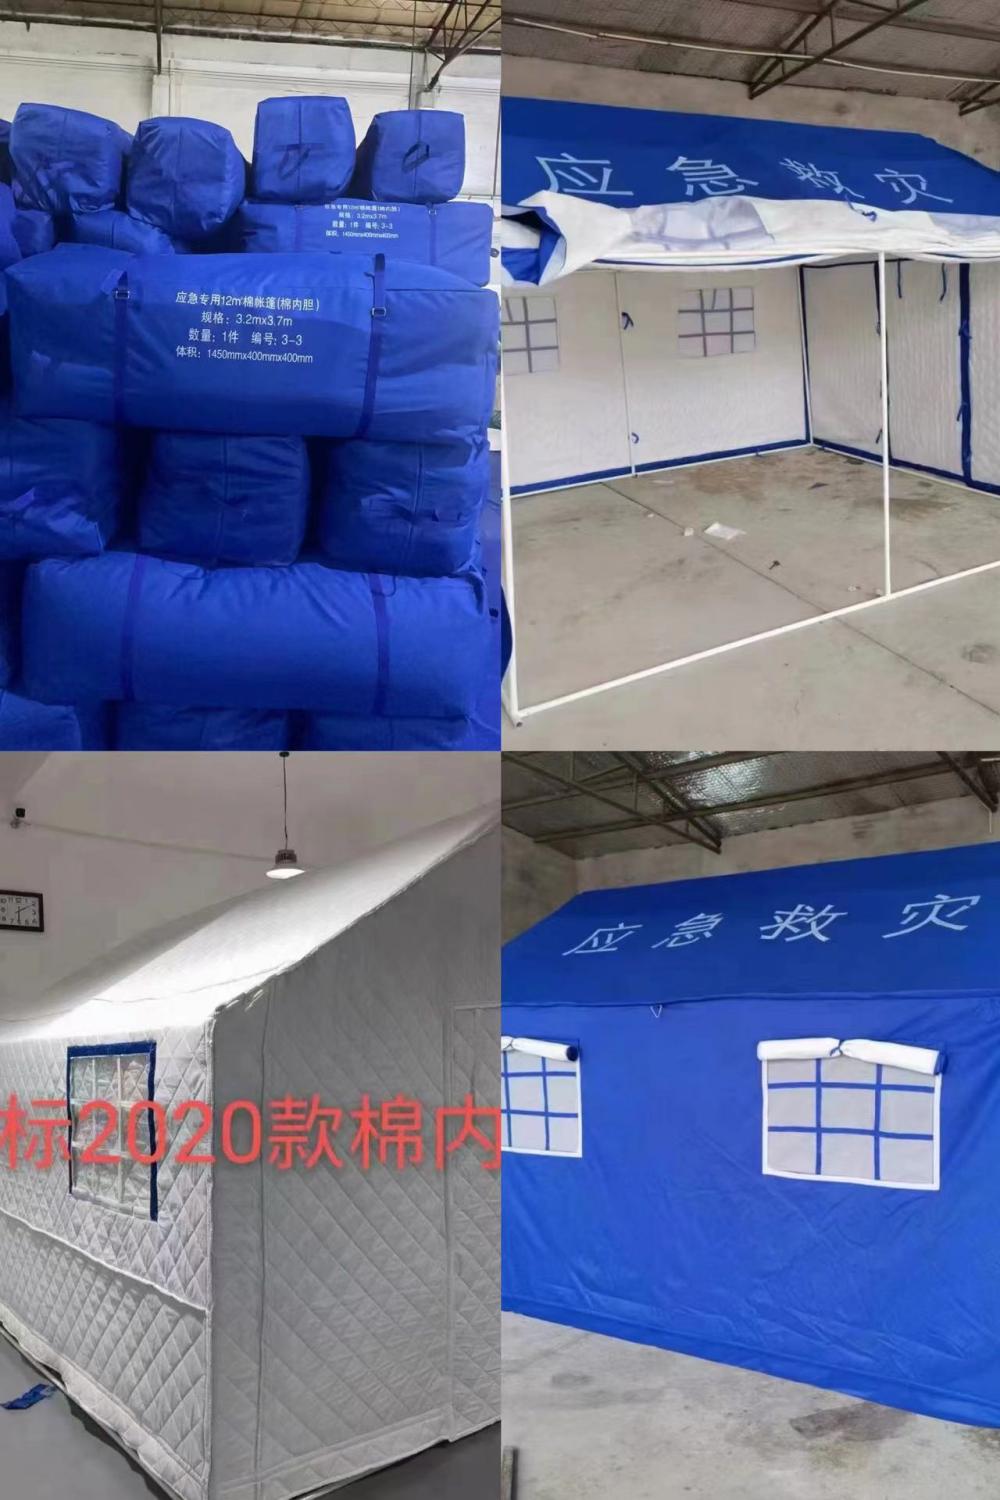 Inflatable tents for medical relief